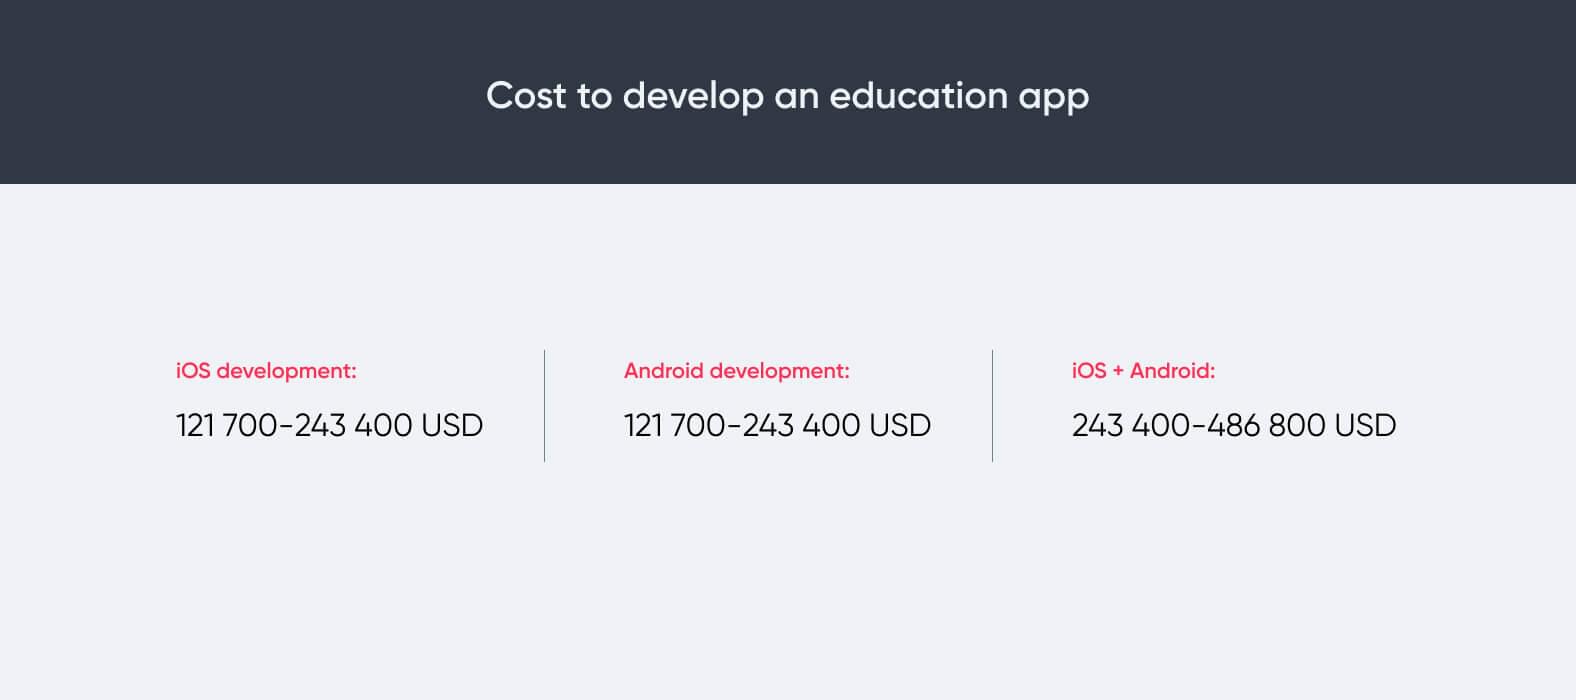 Cost to develop an education app